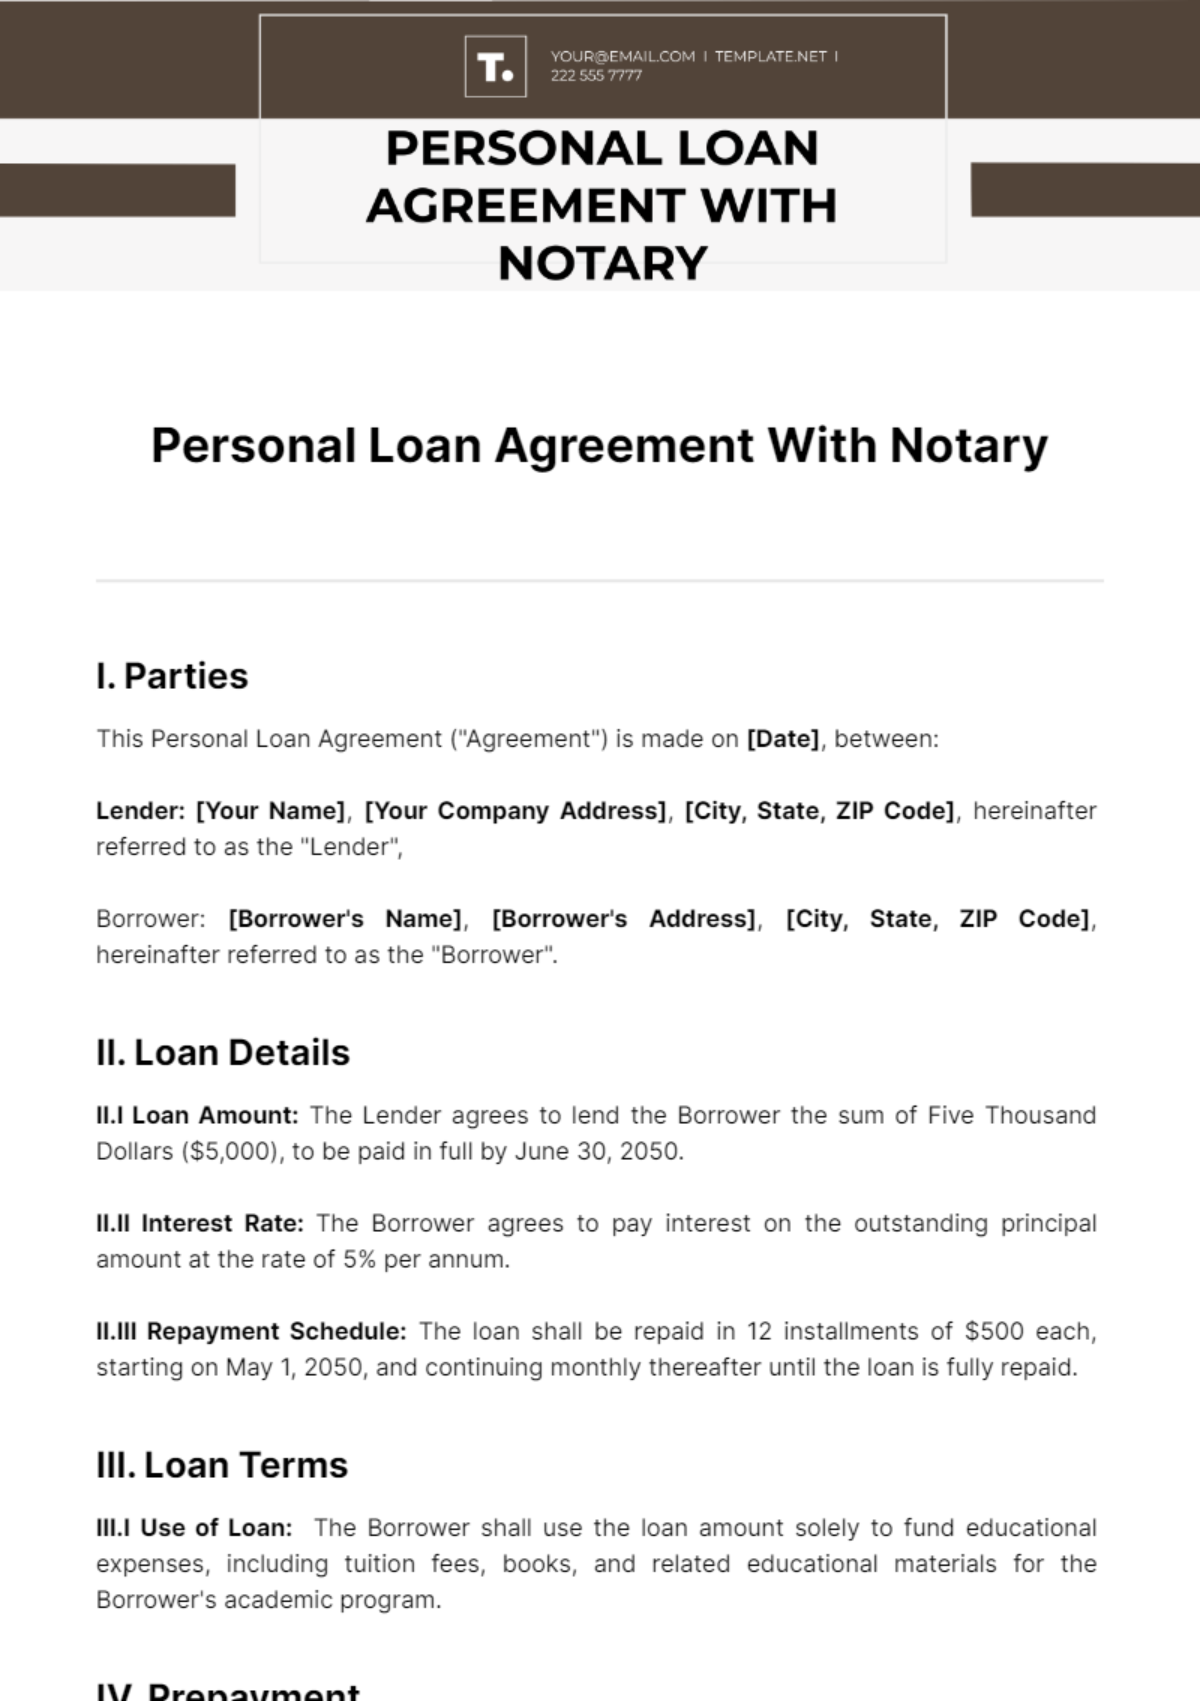 Free Personal Loan Agreement With Notary Template